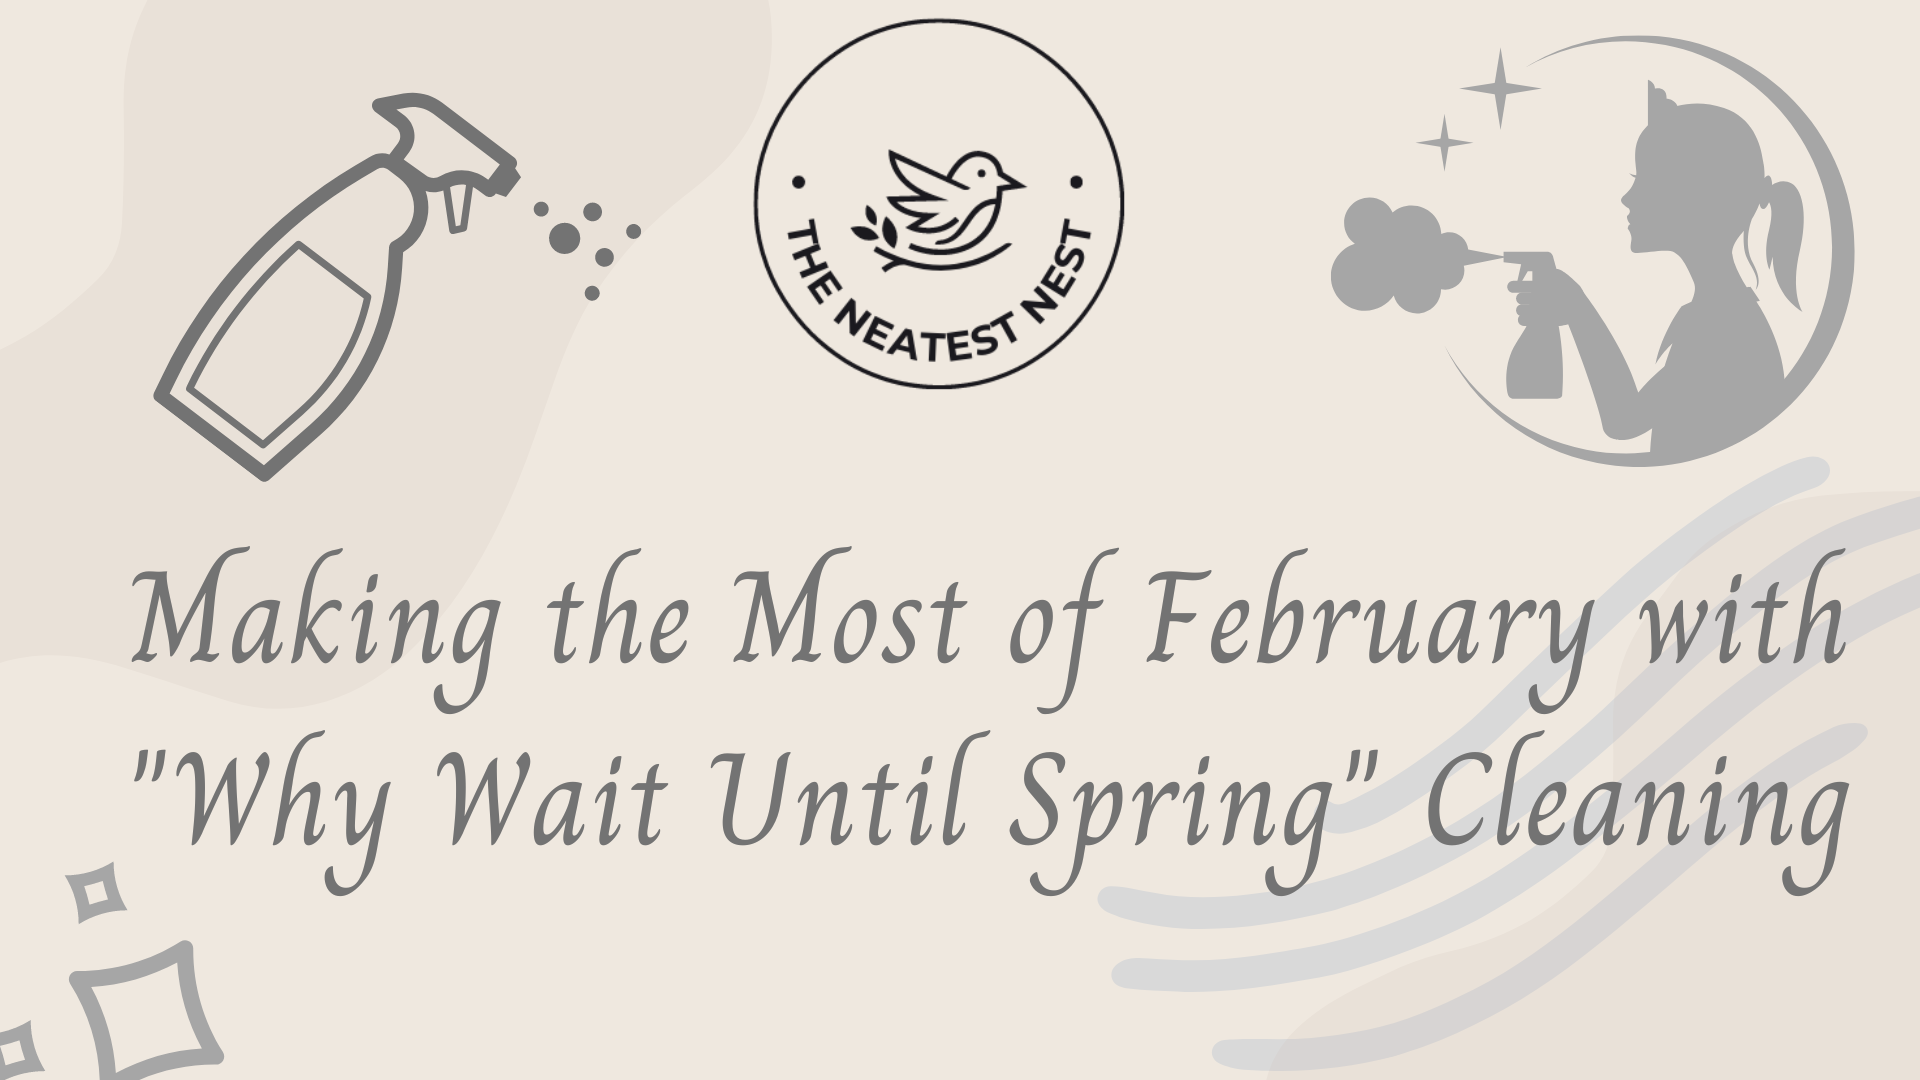 Making the Most of February with “Why Wait Until Spring” Cleaning